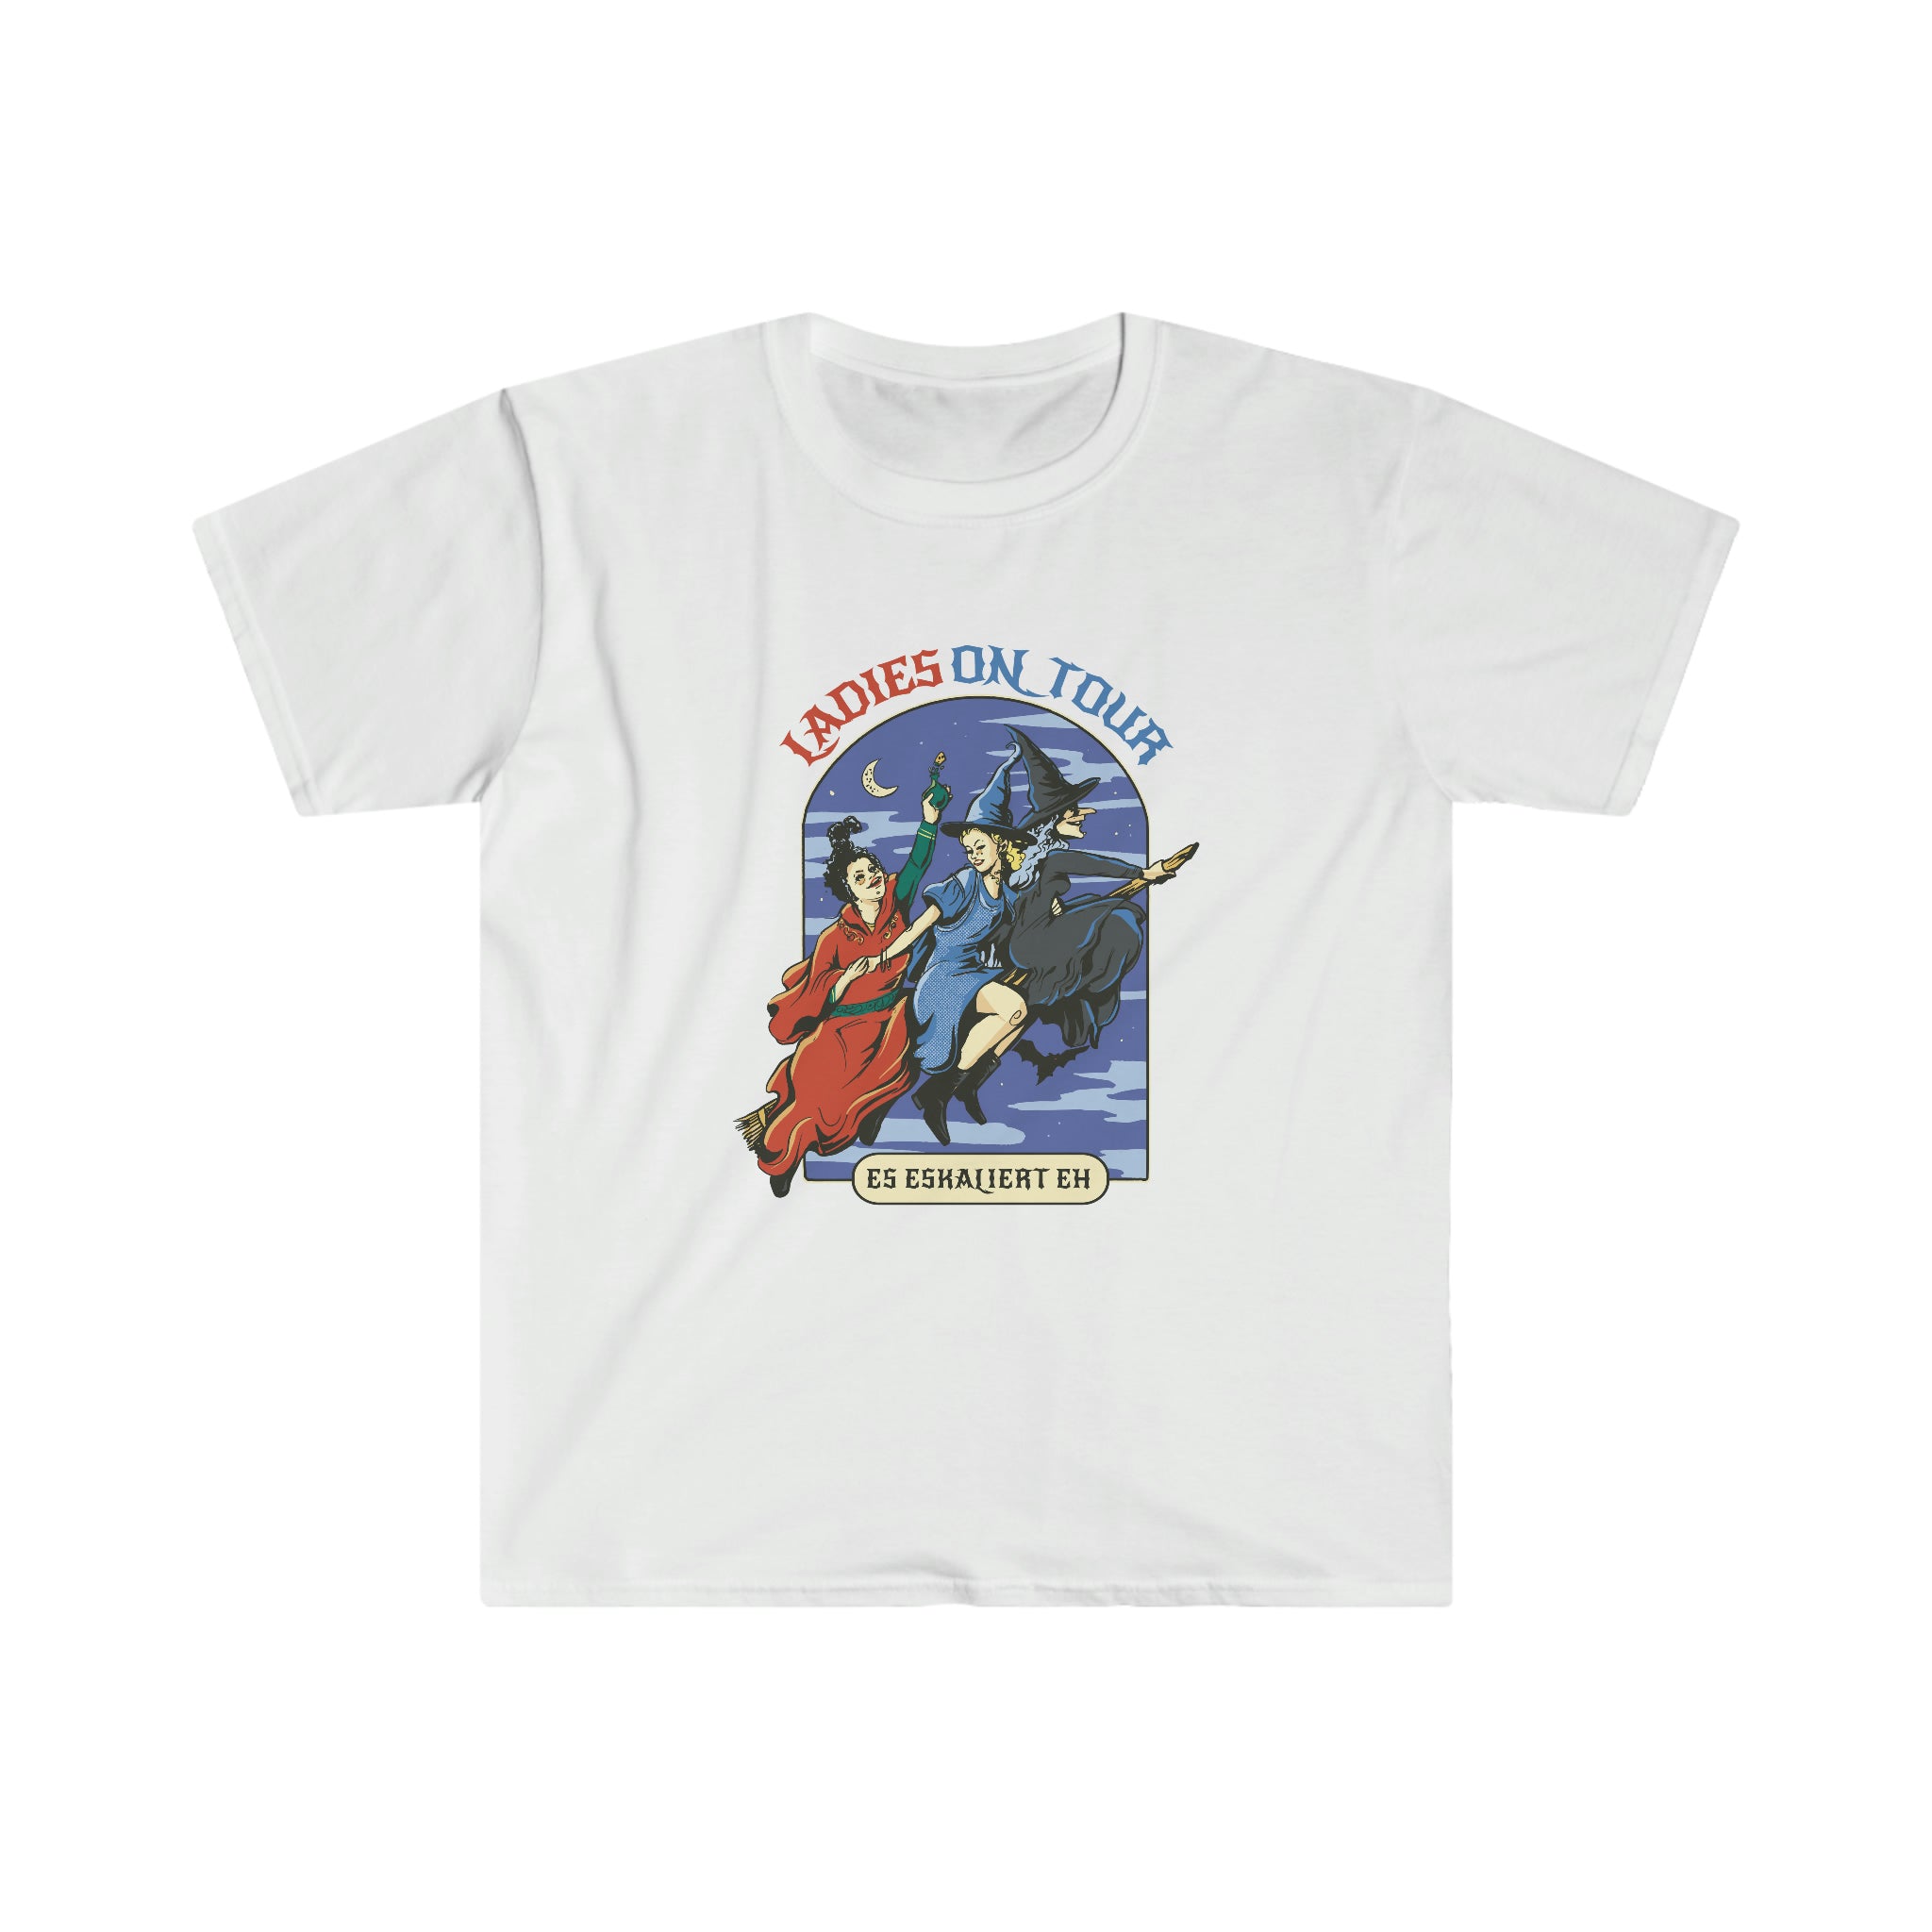 A Ladies On Tour T-Shirt with an image of a man riding a horse, perfect for adventurous women.